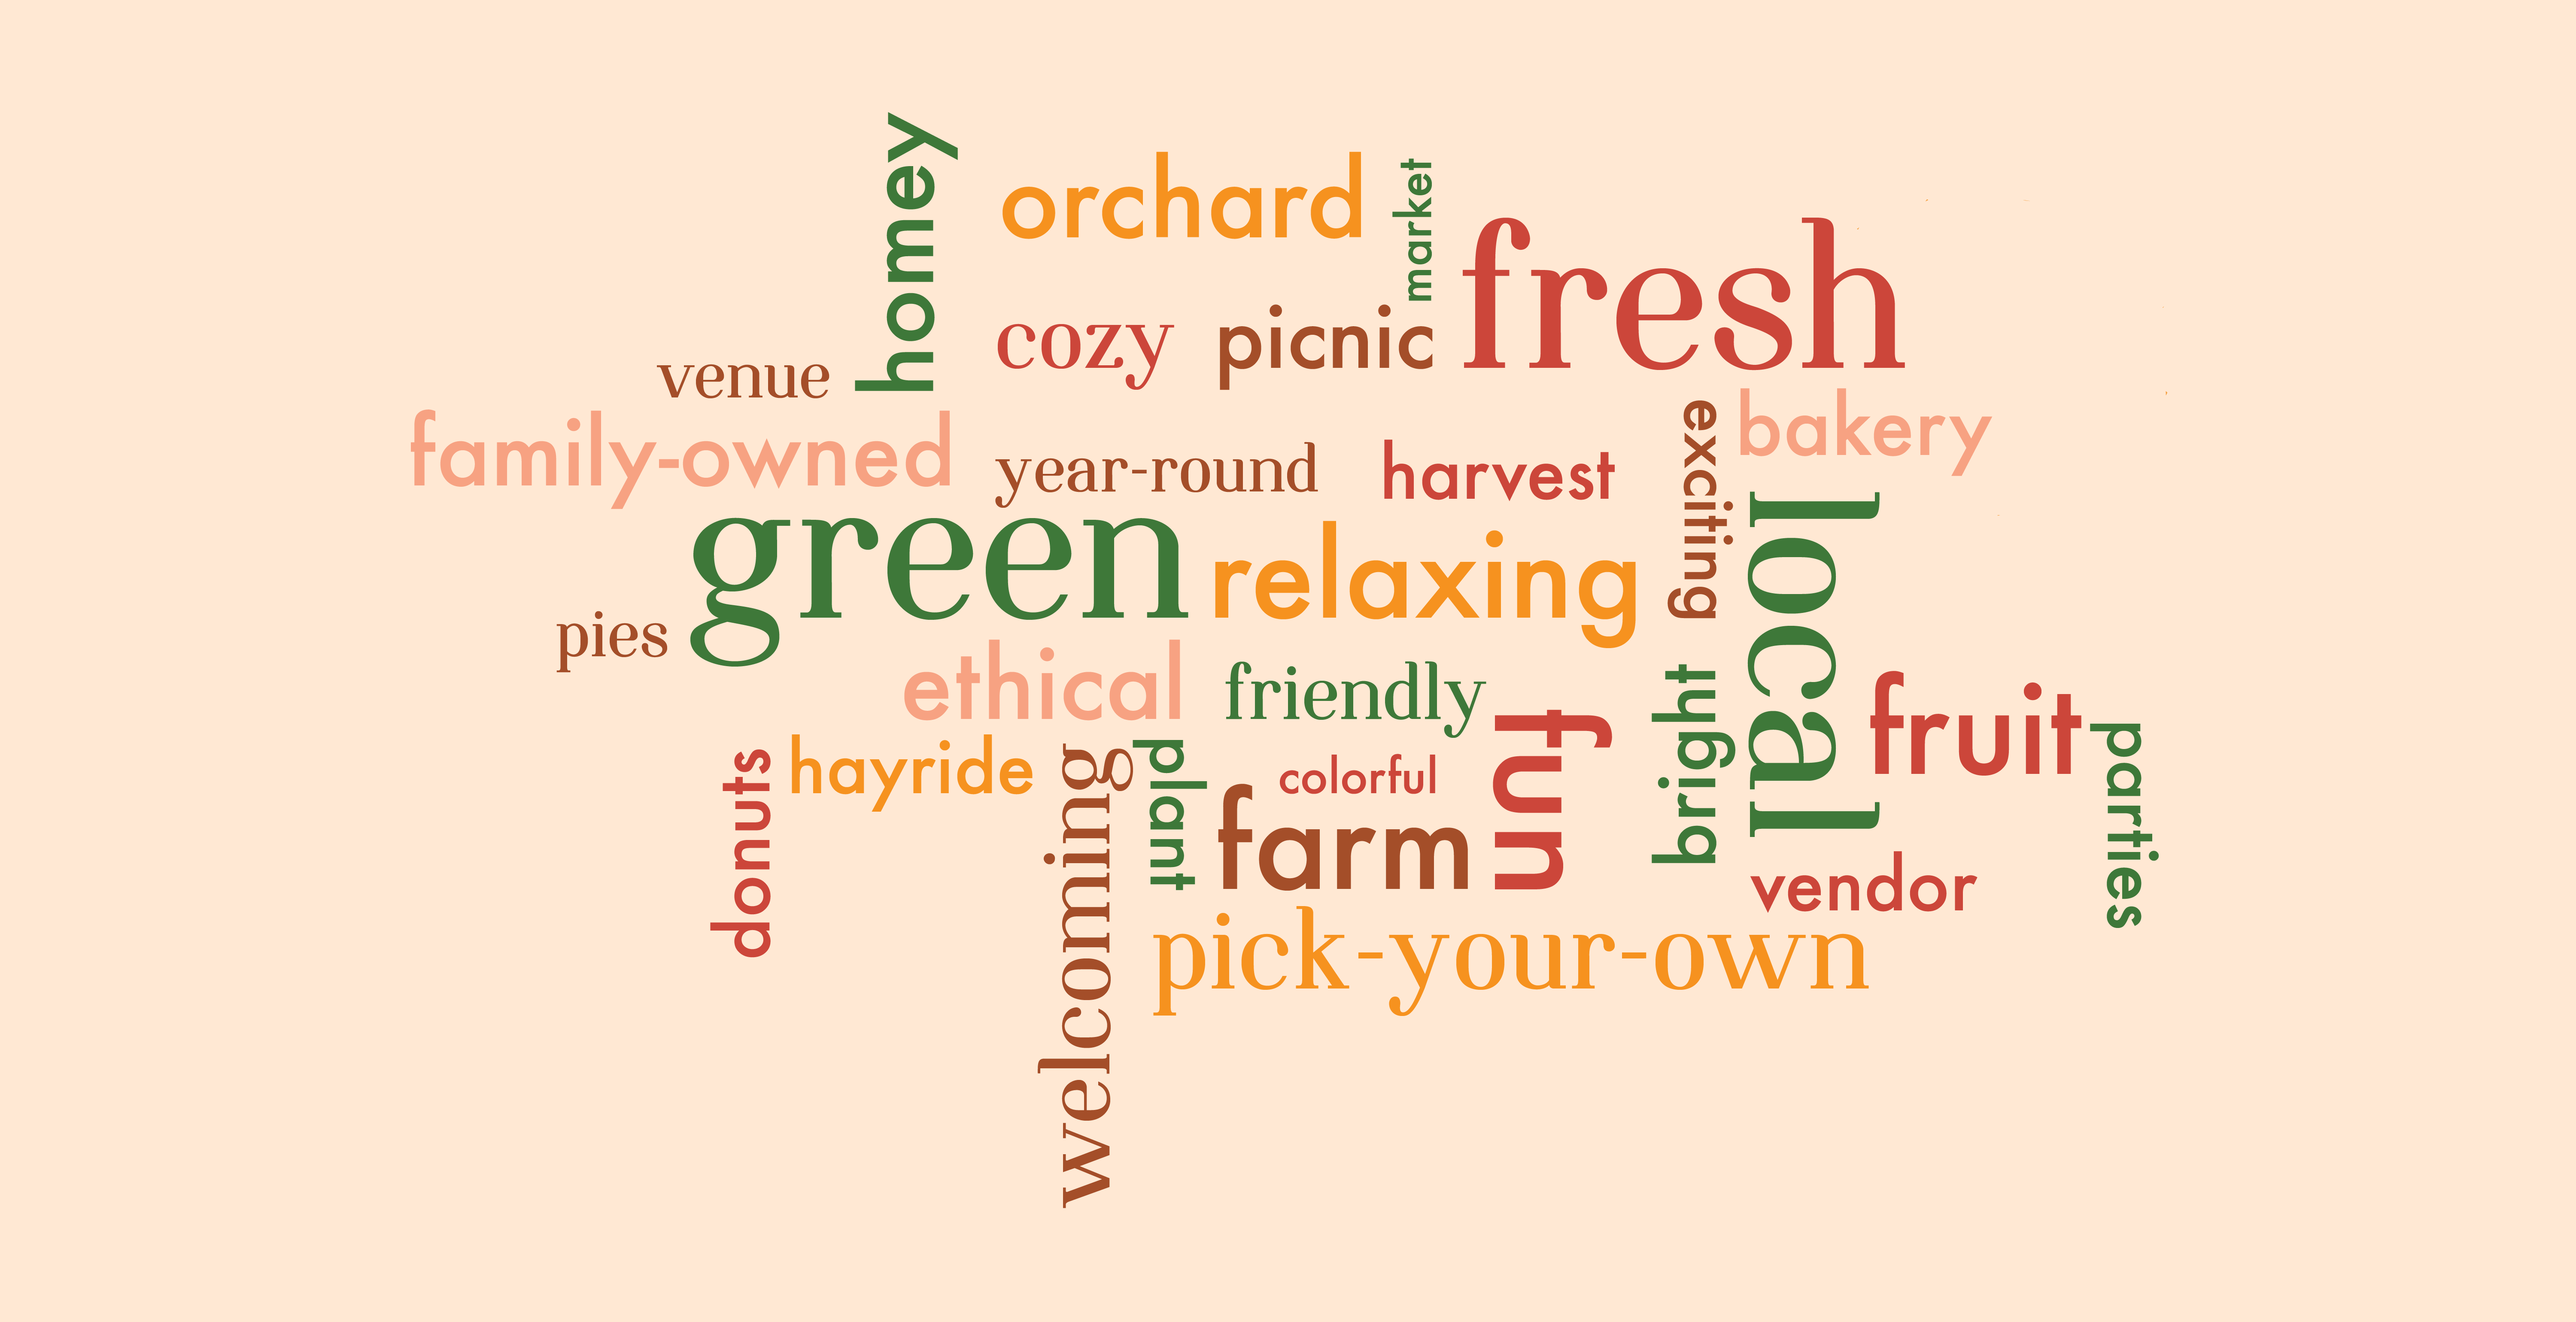 word cloud for highland orchards